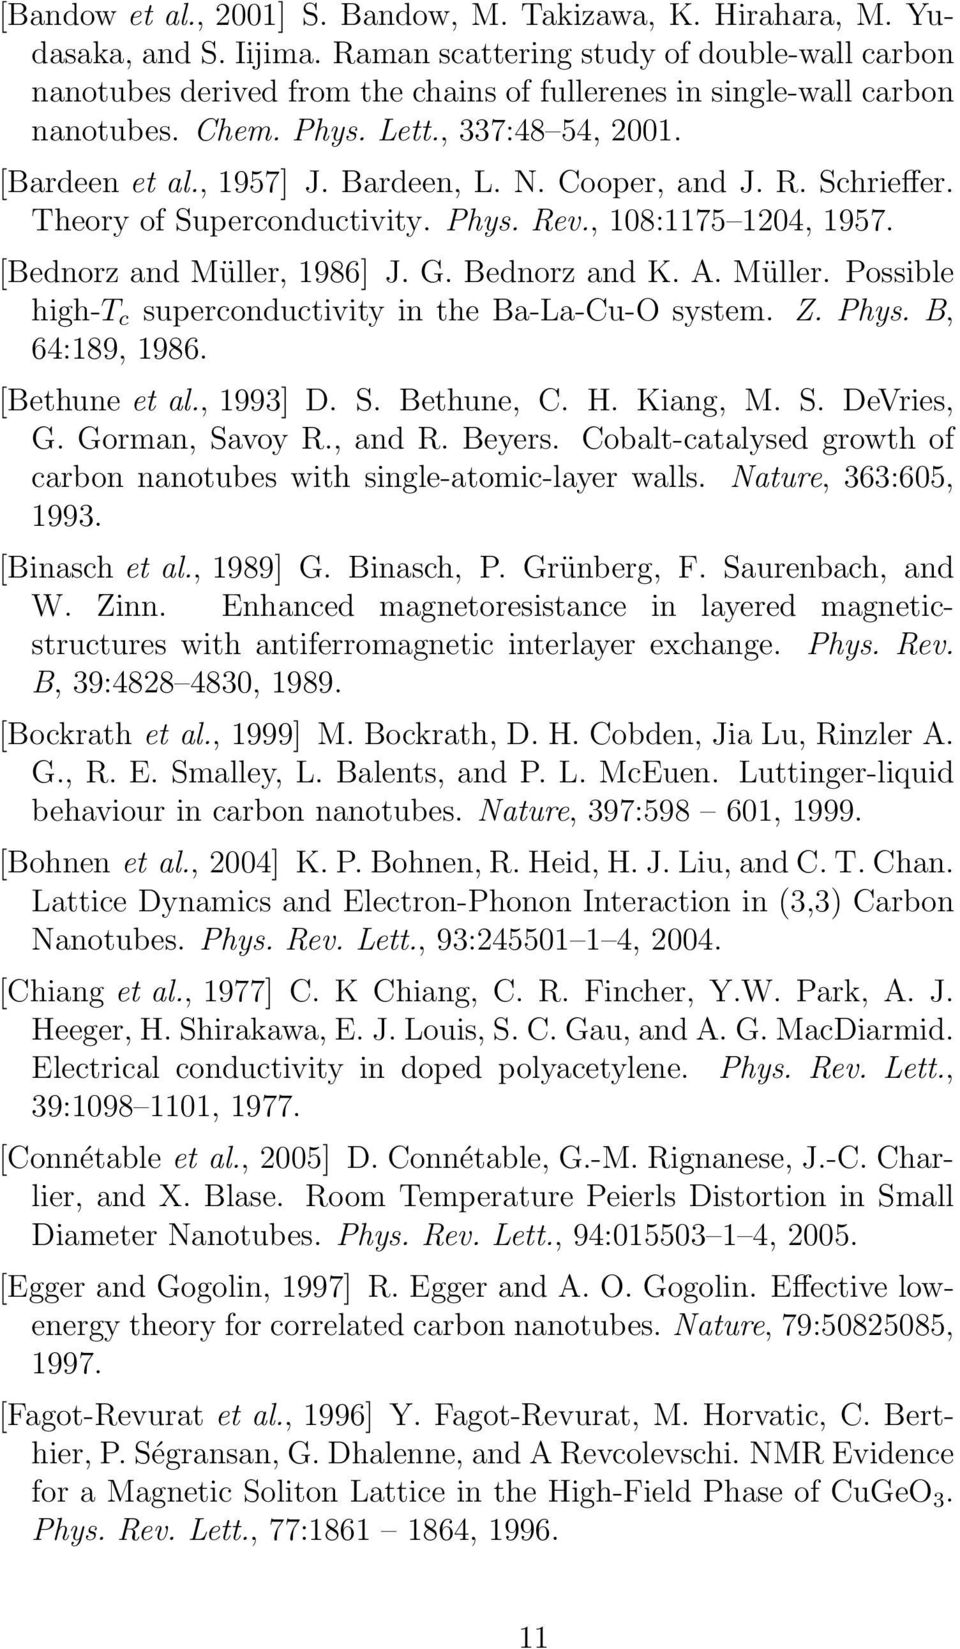 N. Cooper, and J. R. Schrieffer. Theory of Superconductivity. Phys. Rev., 108:1175 1204, 1957. [Bednorz and Müller, 1986] J. G. Bednorz and K. A. Müller. Possible high-t c superconductivity in the Ba-La-Cu-O system.